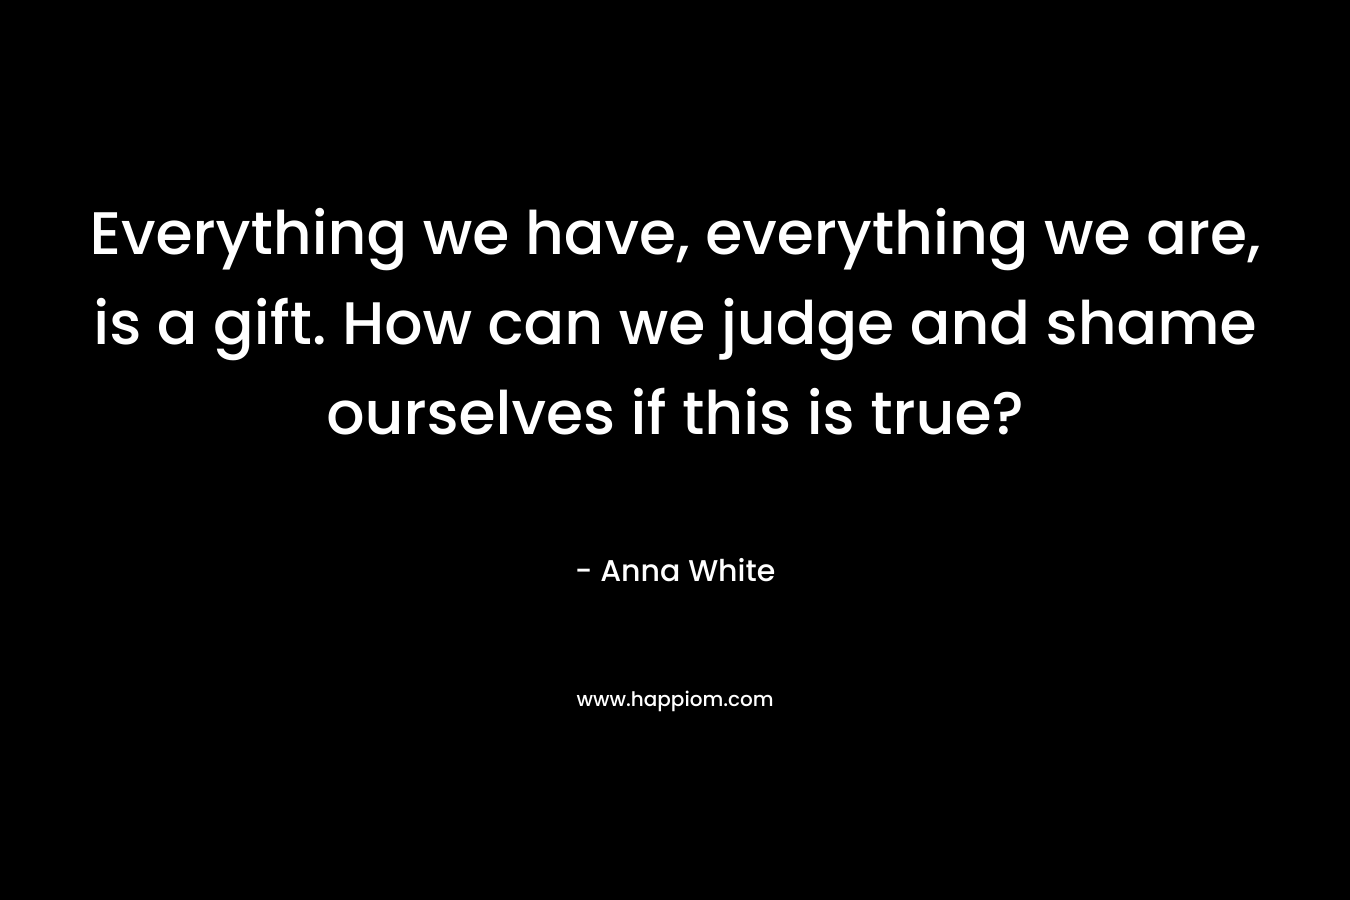 Everything we have, everything we are, is a gift. How can we judge and shame ourselves if this is true?